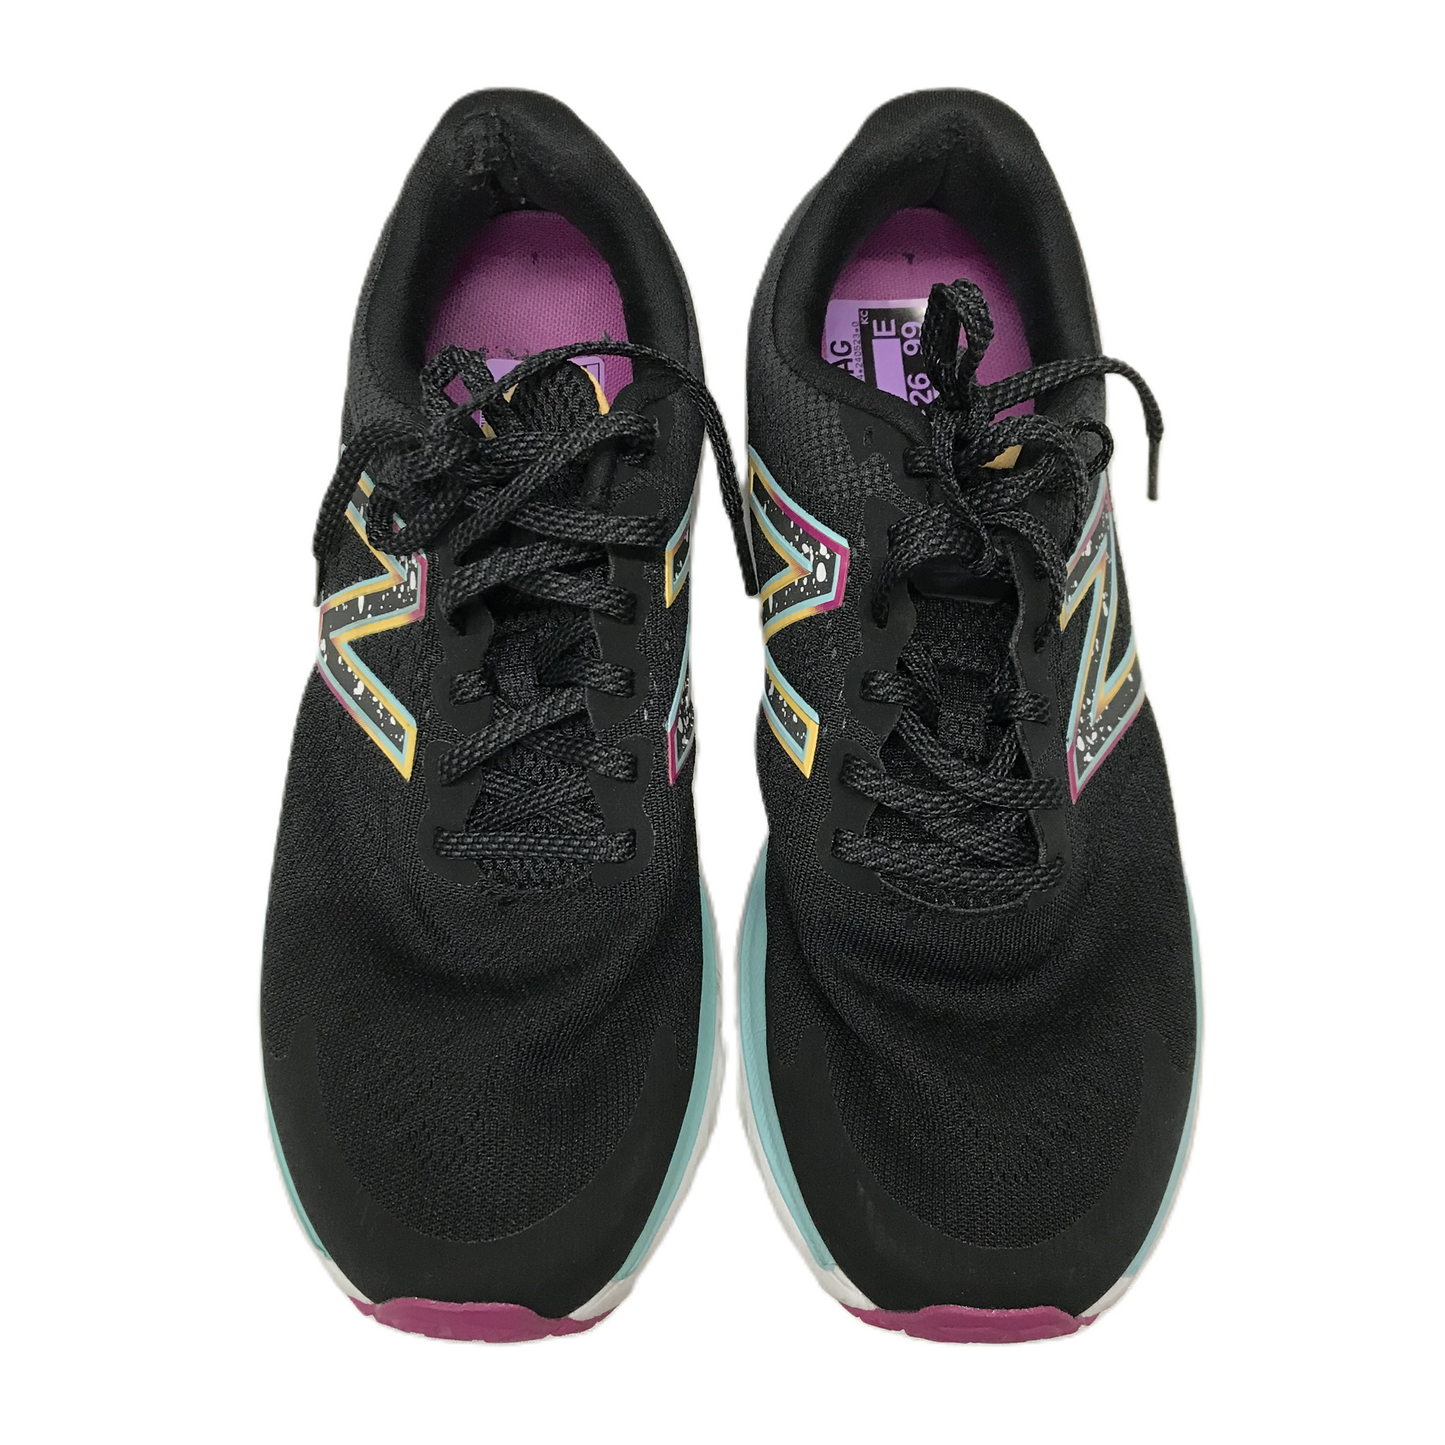 Black Shoes Athletic By New Balance, Size: 9.5